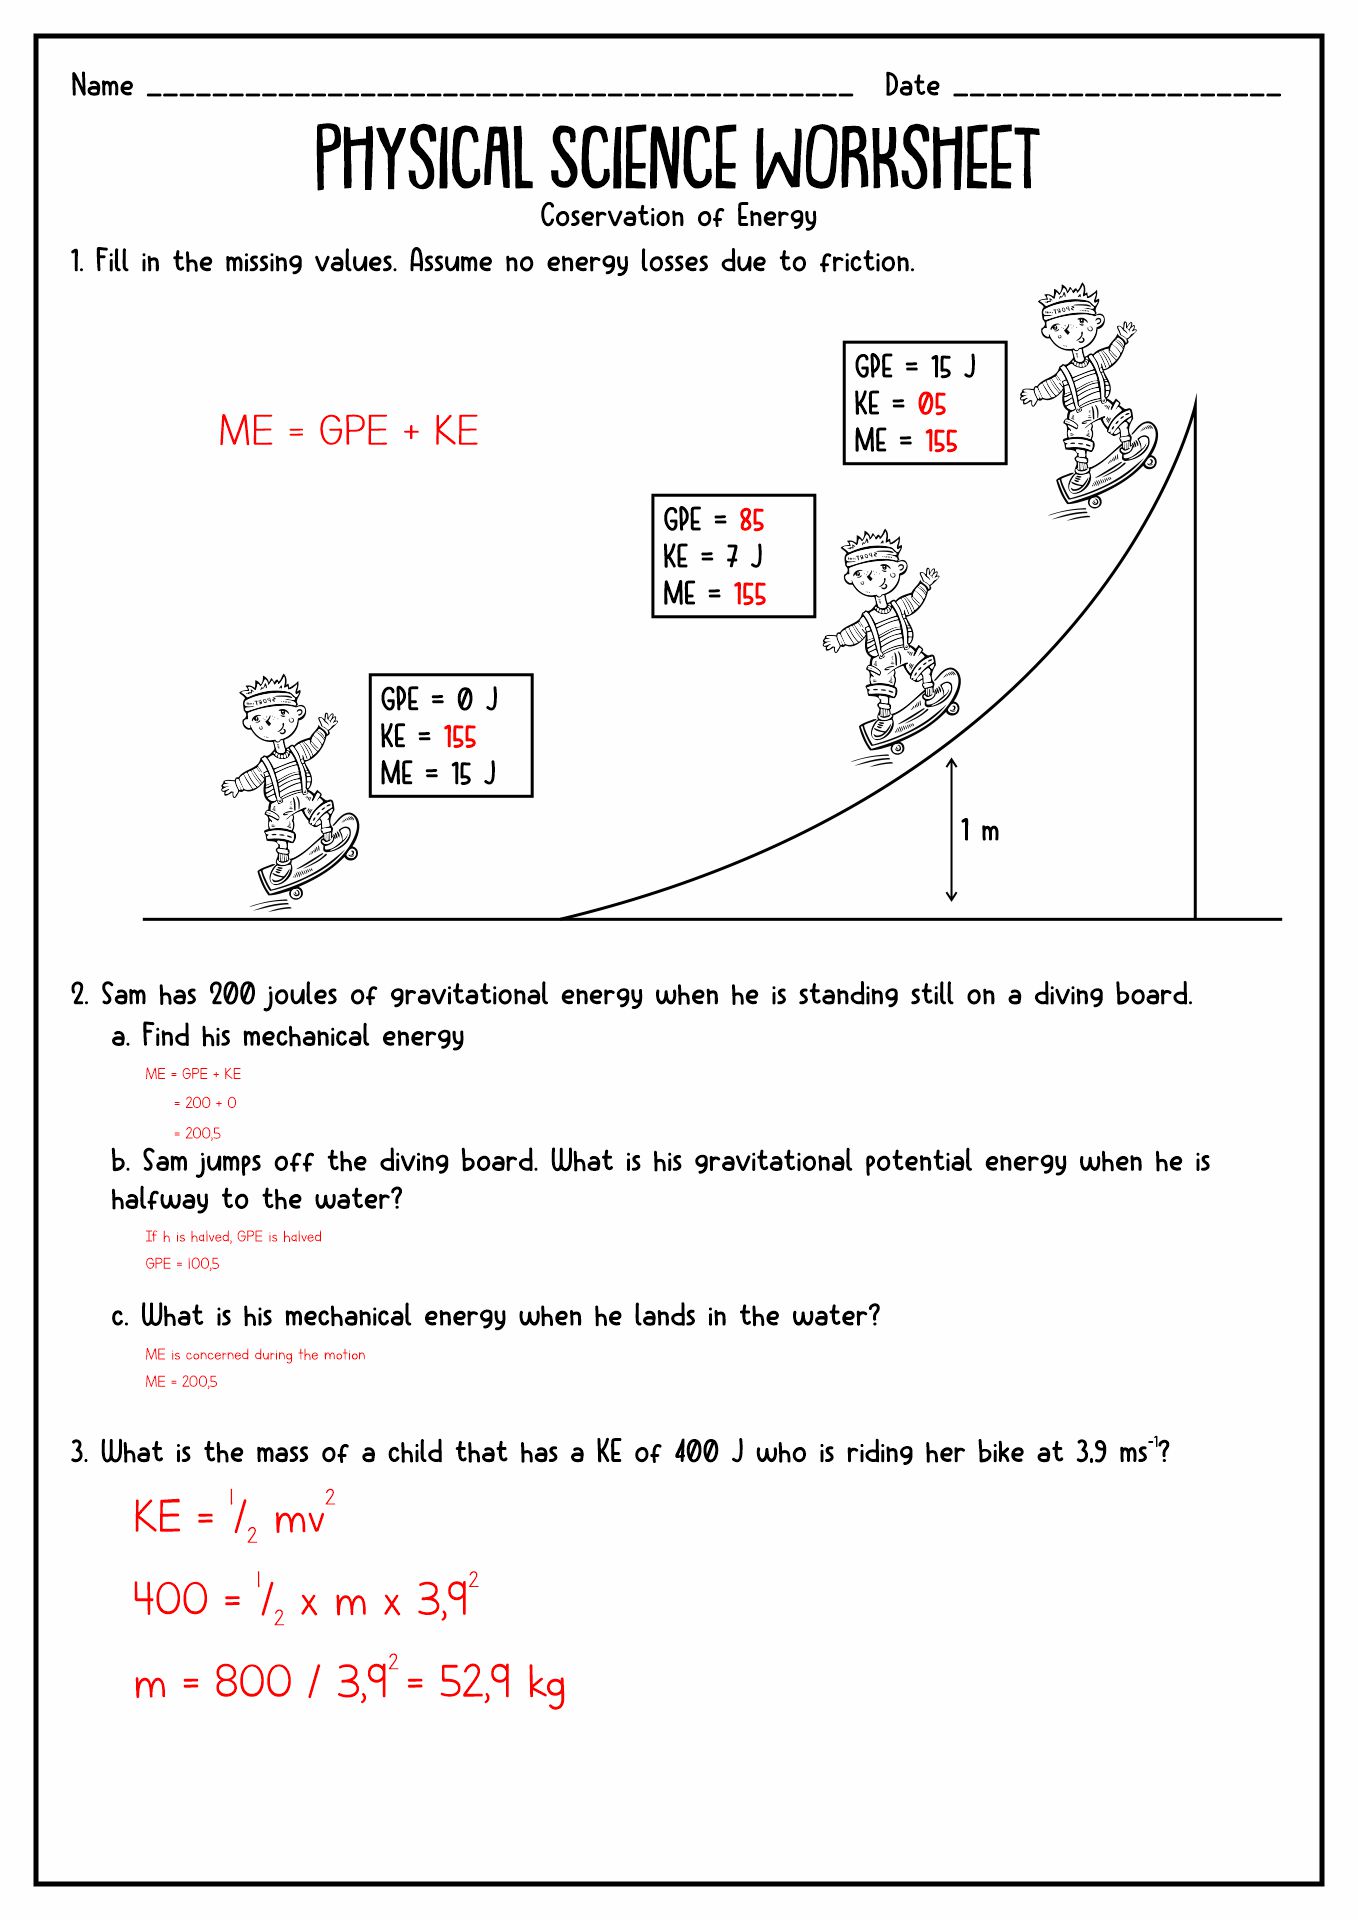 Conservation of Energy Worksheet Answers